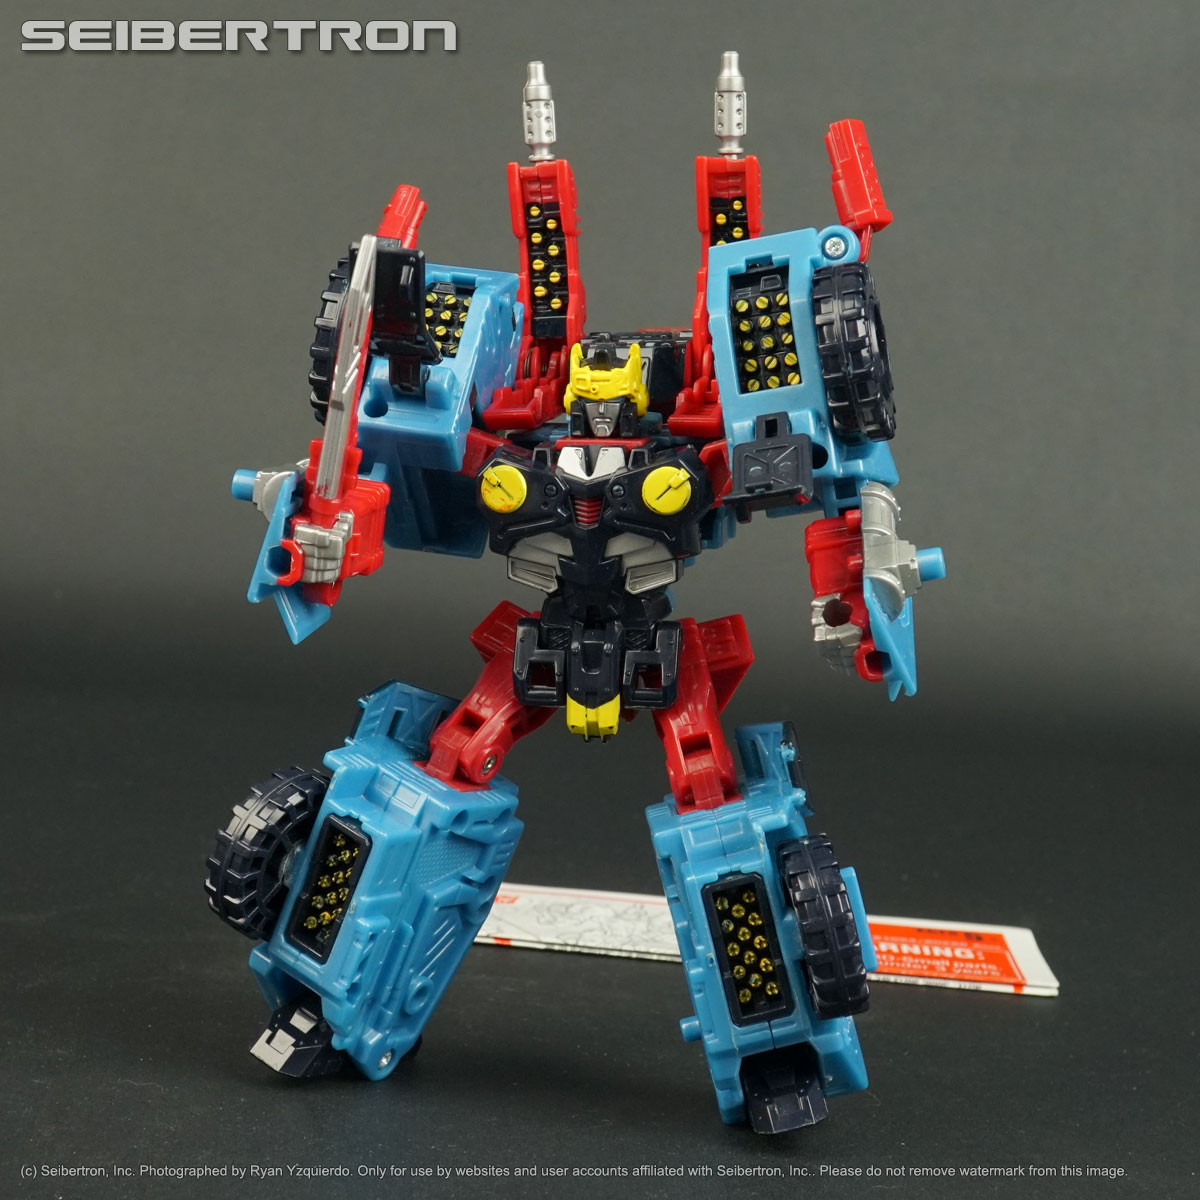 CYBERTRON DEFENSE HOT SHOT Transformers Cybertron deluxe complete + d1o4 key